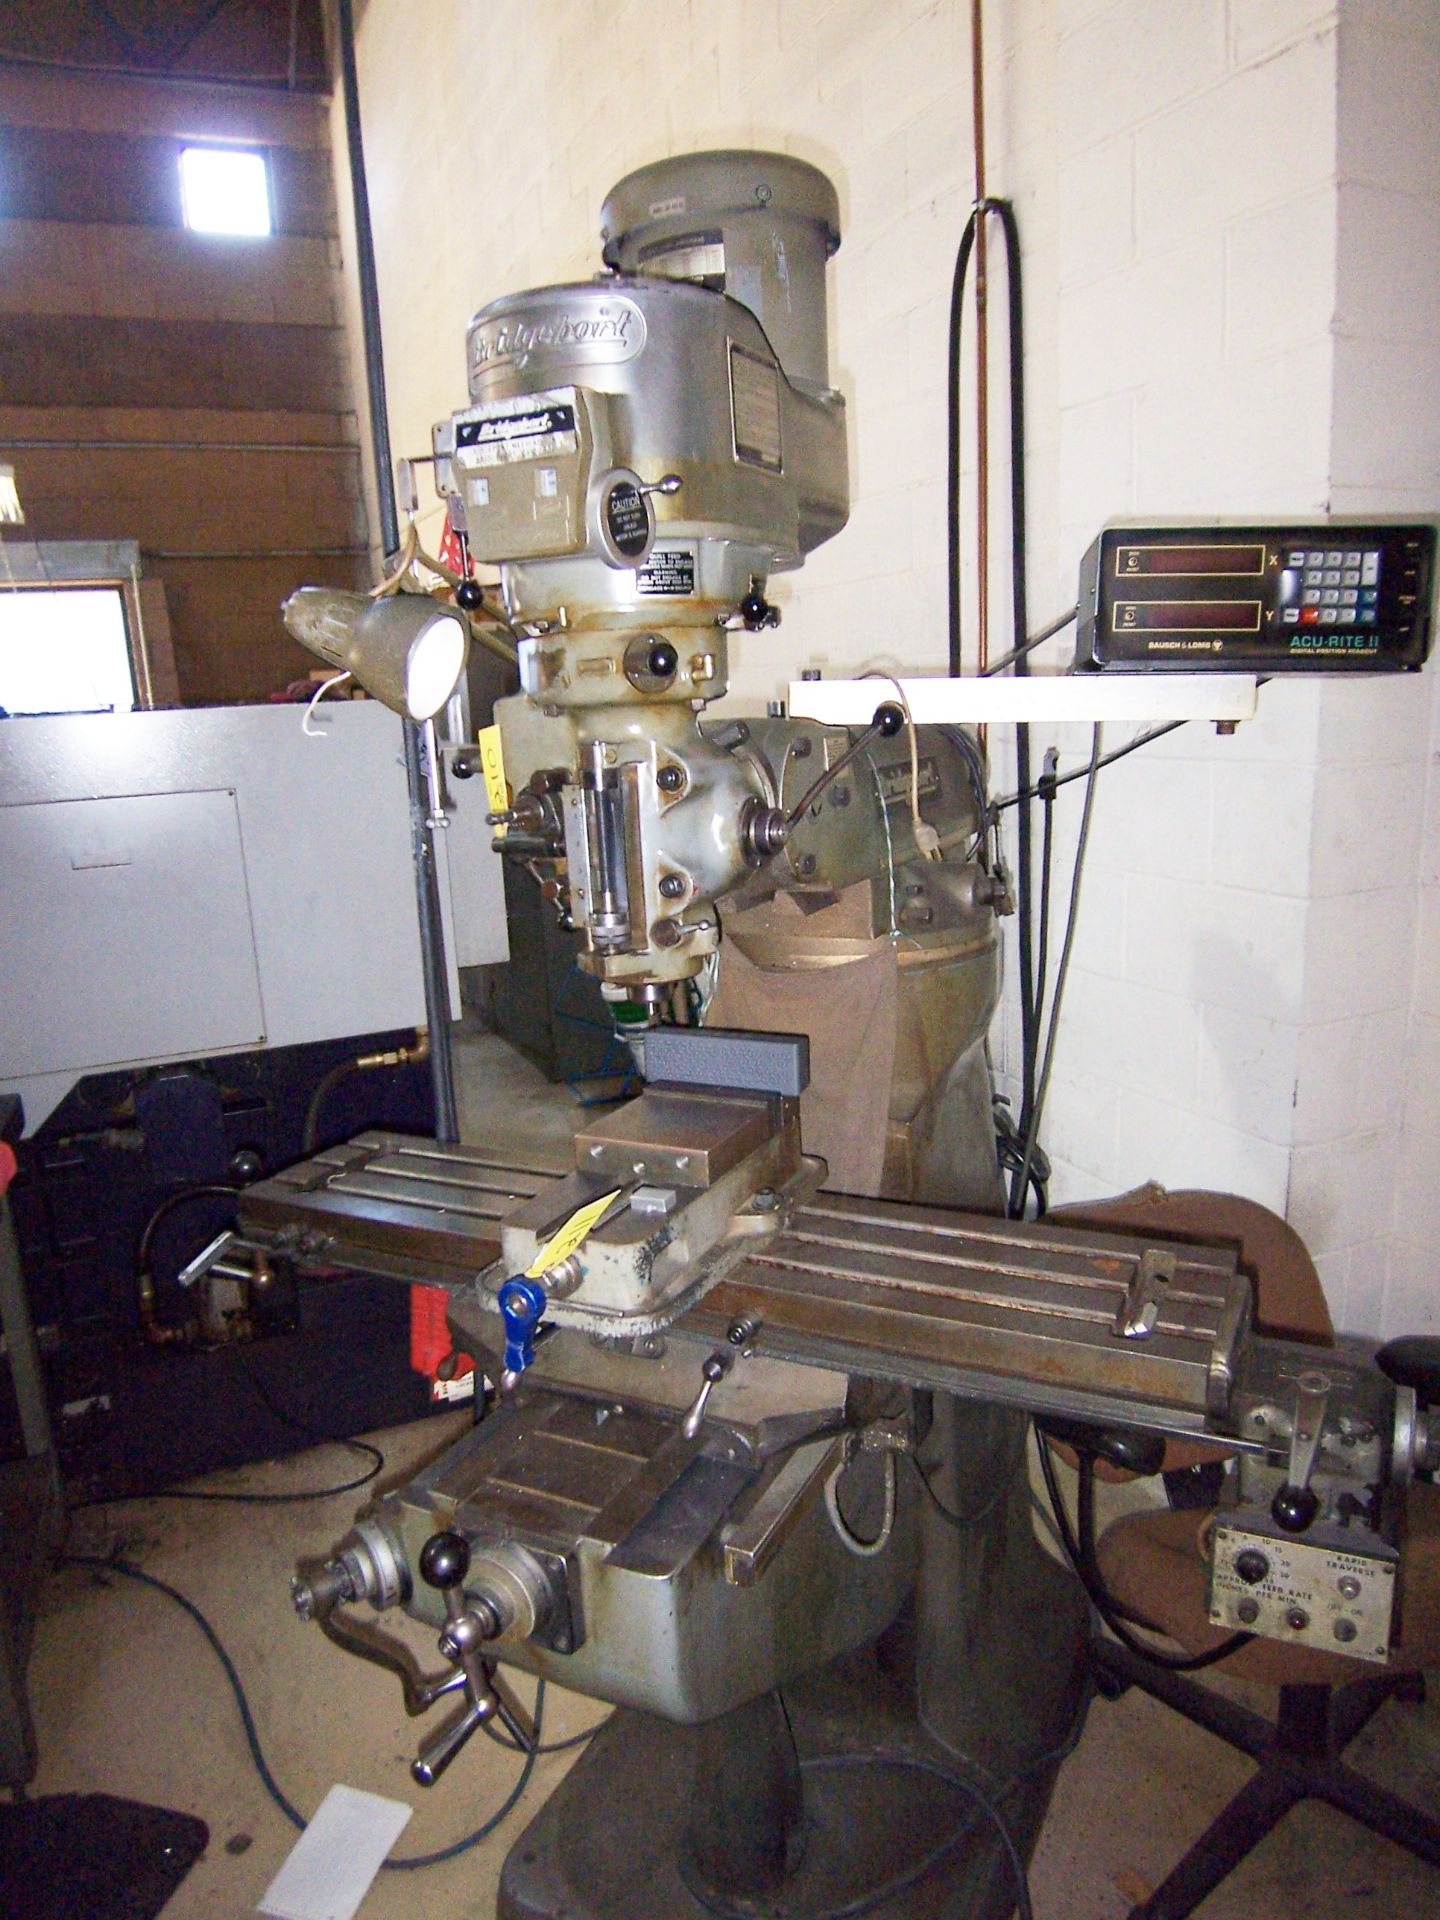 BRIDGEPORT SERIES I 2HP VERTICAL MILLING MACHINE, WITH 9" X 42" POWER FEED TABLE, SPINDLE SPEEDS - Image 2 of 2